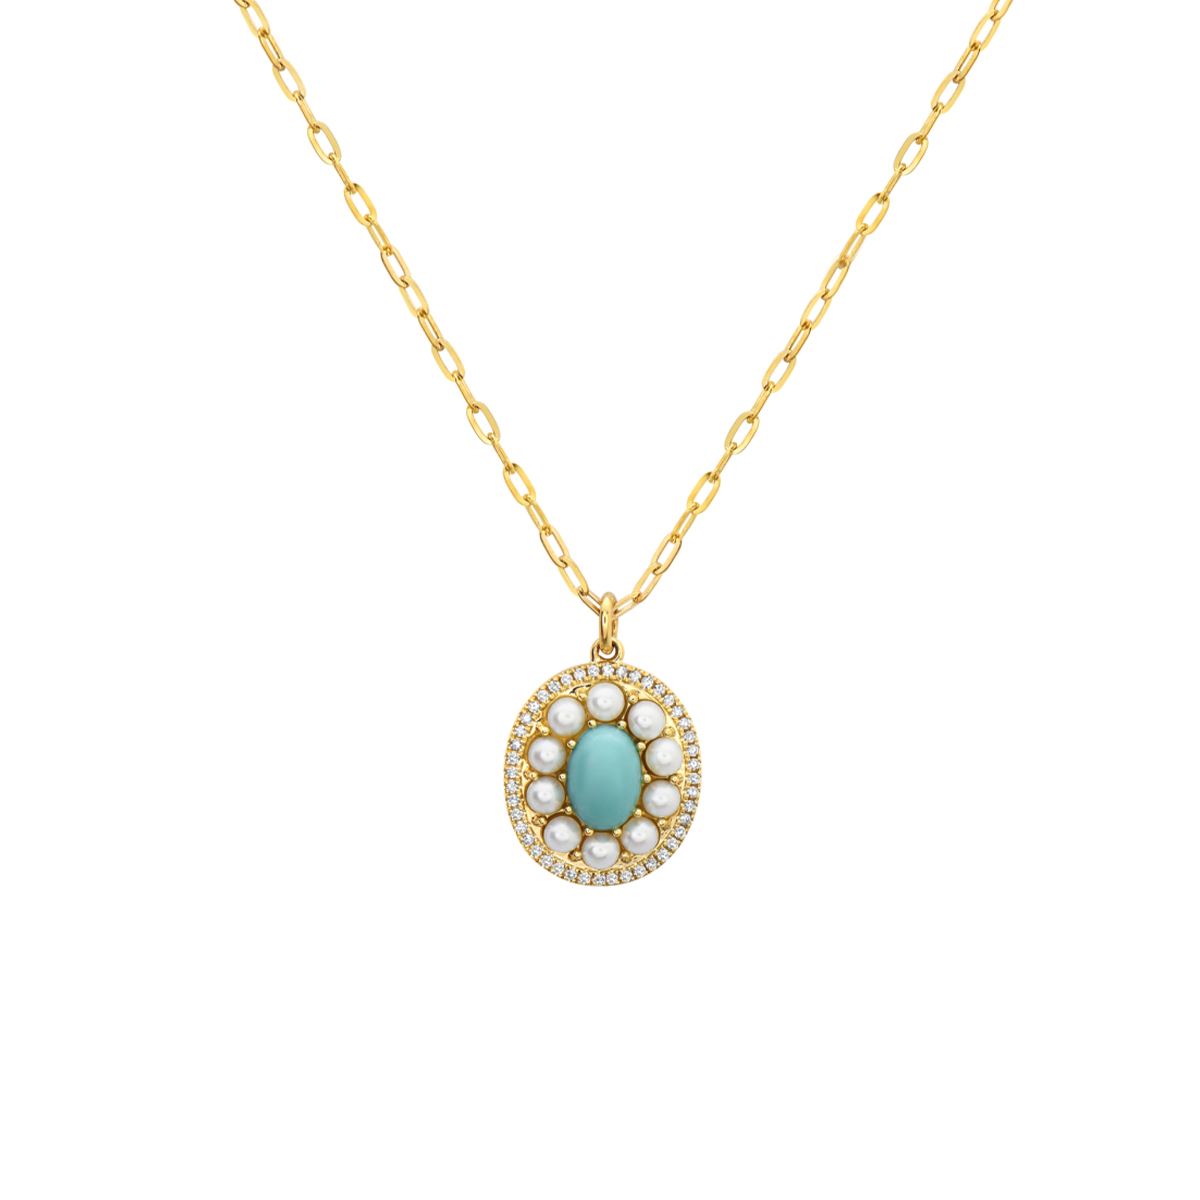 14K Yellow Gold Turquoise, Pearl, and Diamond Necklace